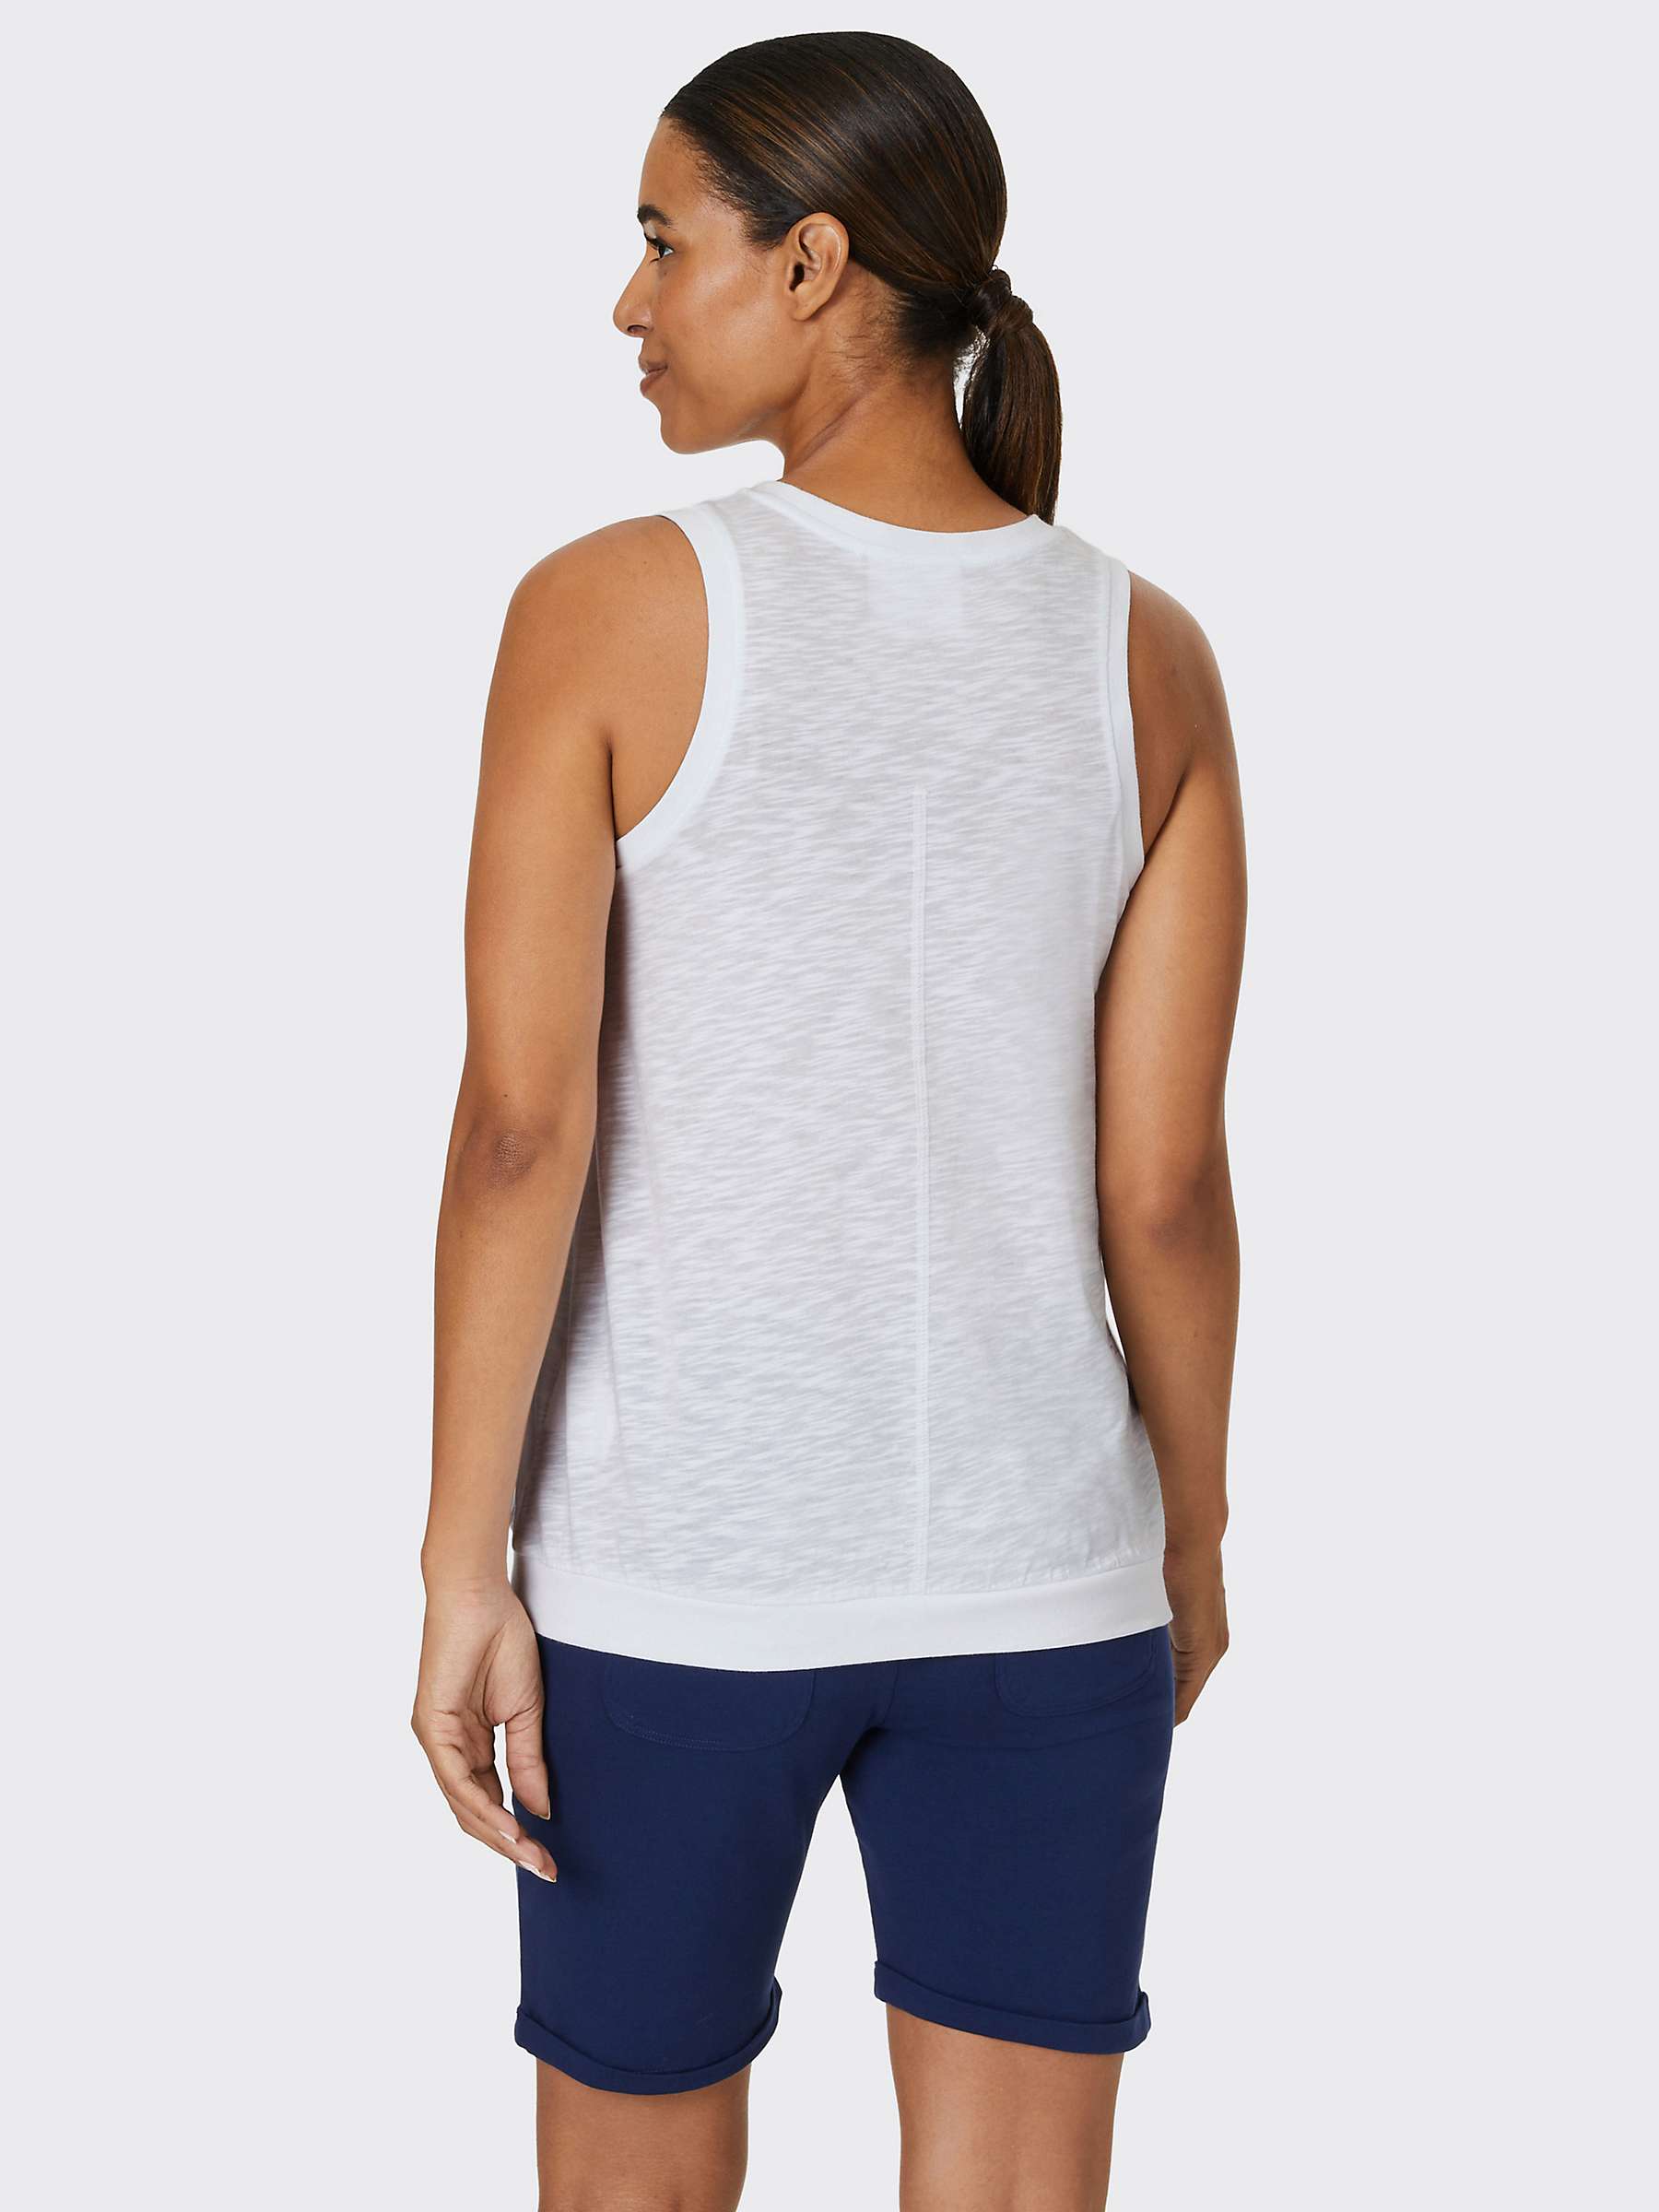 Buy Venice Beach Remy Tank Top, White Online at johnlewis.com